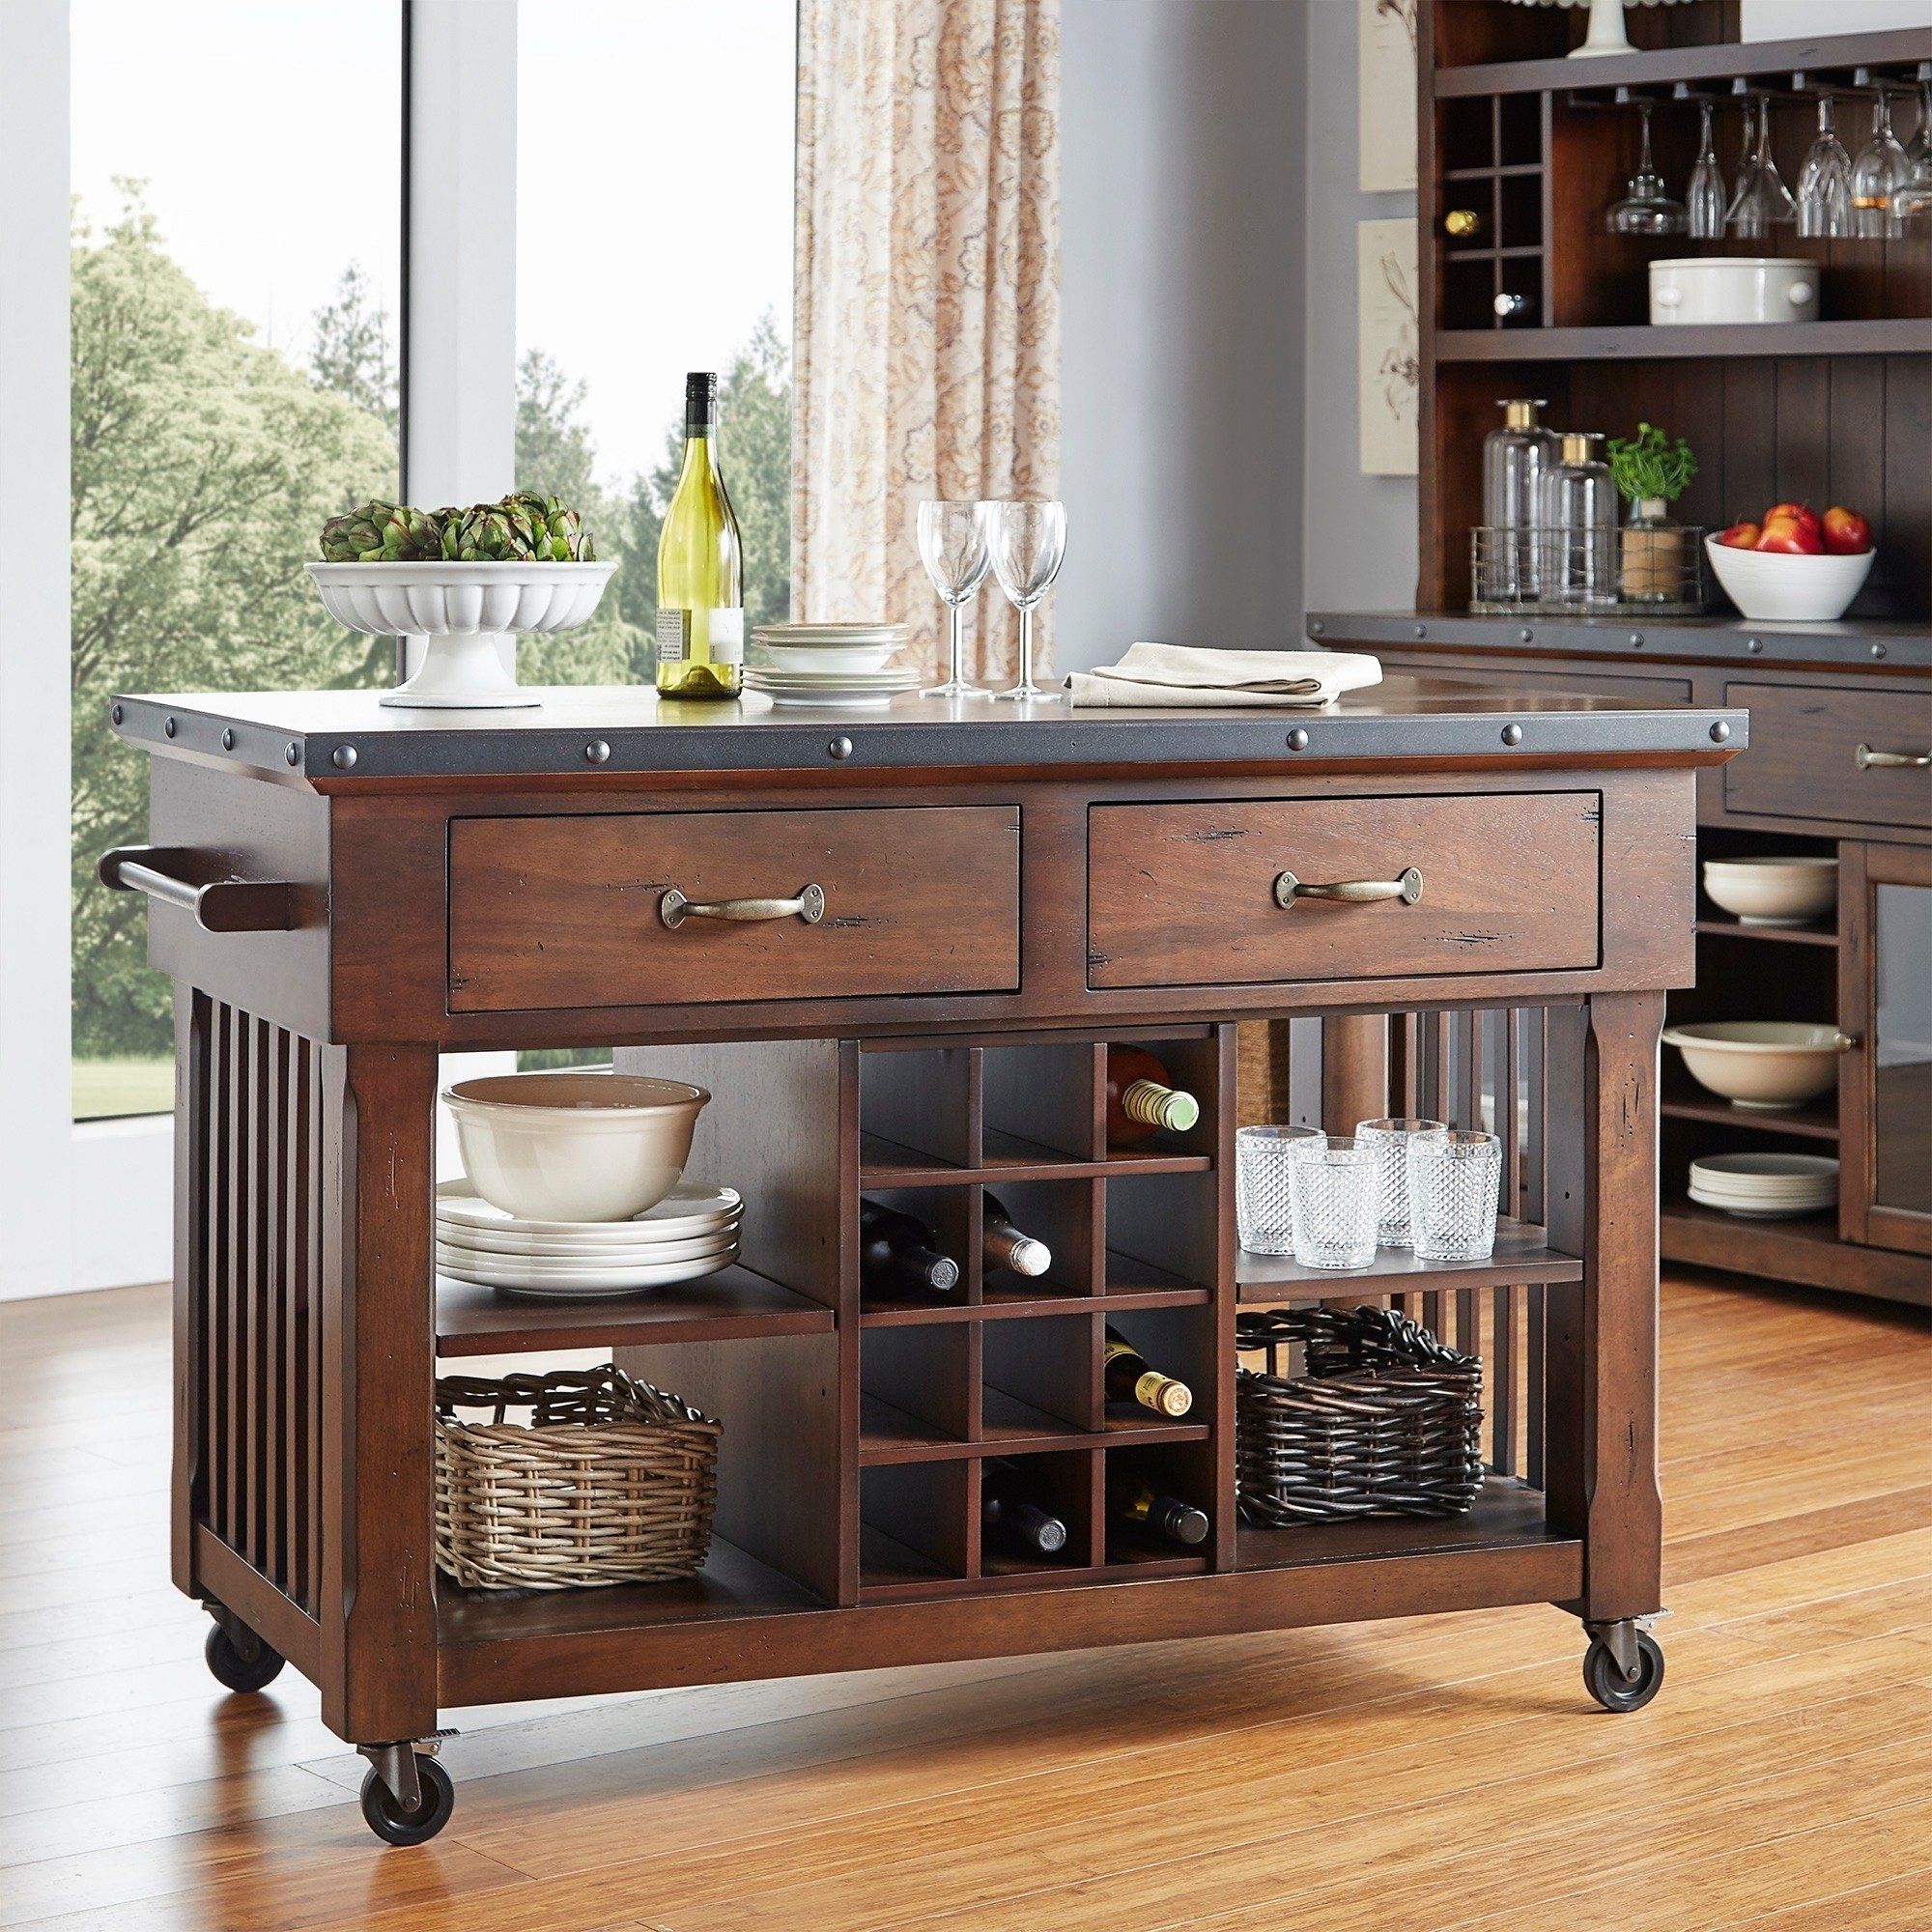 Shop Norwood 2 Drawer Rolling Kitchen Island With Wine Rack – Free Within Fashionable Norwood Upholstered Hostess Chairs (View 16 of 20)